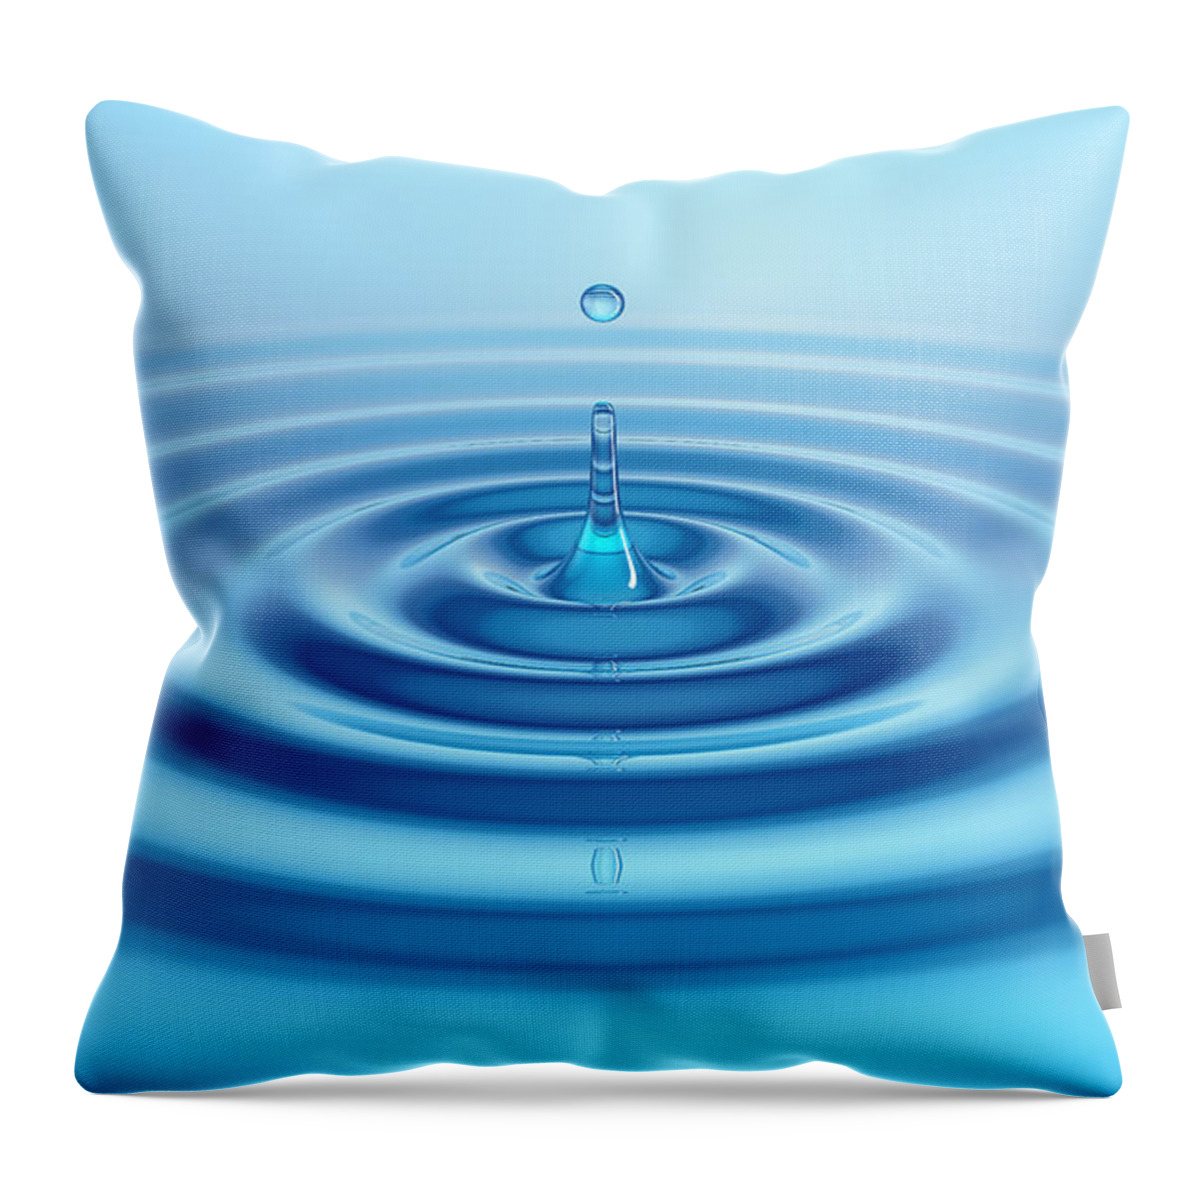 Transparent Throw Pillow featuring the photograph Drop Of Water by Henrik5000